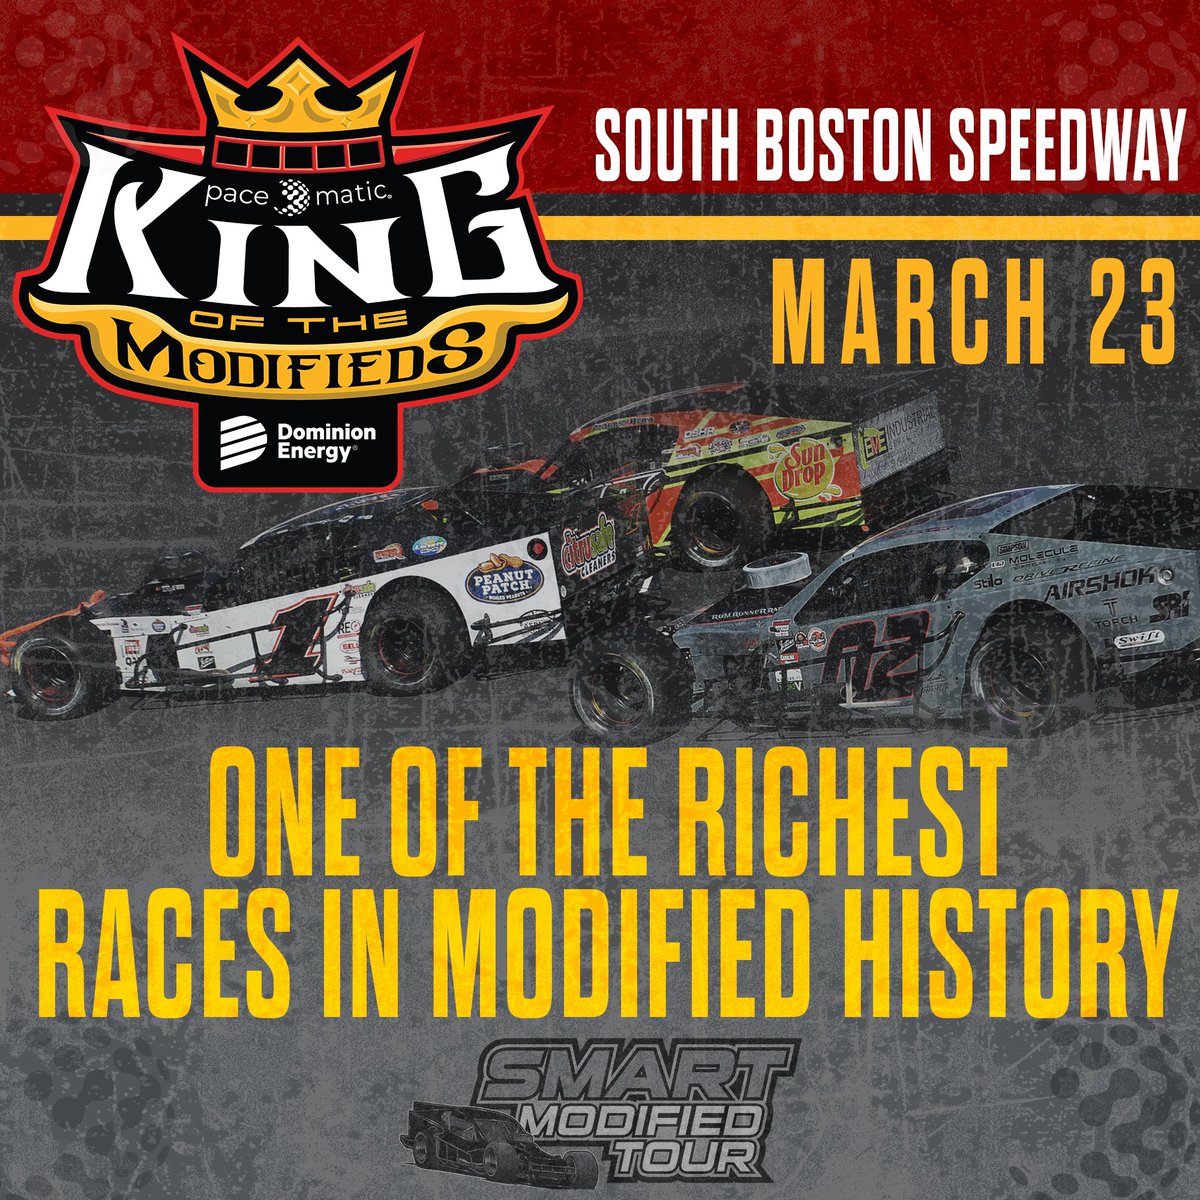 💰💰💰 One of the richest Modified races in history. @paceomatic 𝓚𝓲𝓷𝓰 𝓸𝓯 𝓽𝓱𝓮 𝓜𝓸𝓭𝓲𝓯𝓲𝓮𝓭𝓼 March 23 - @SoBoSpeedway57